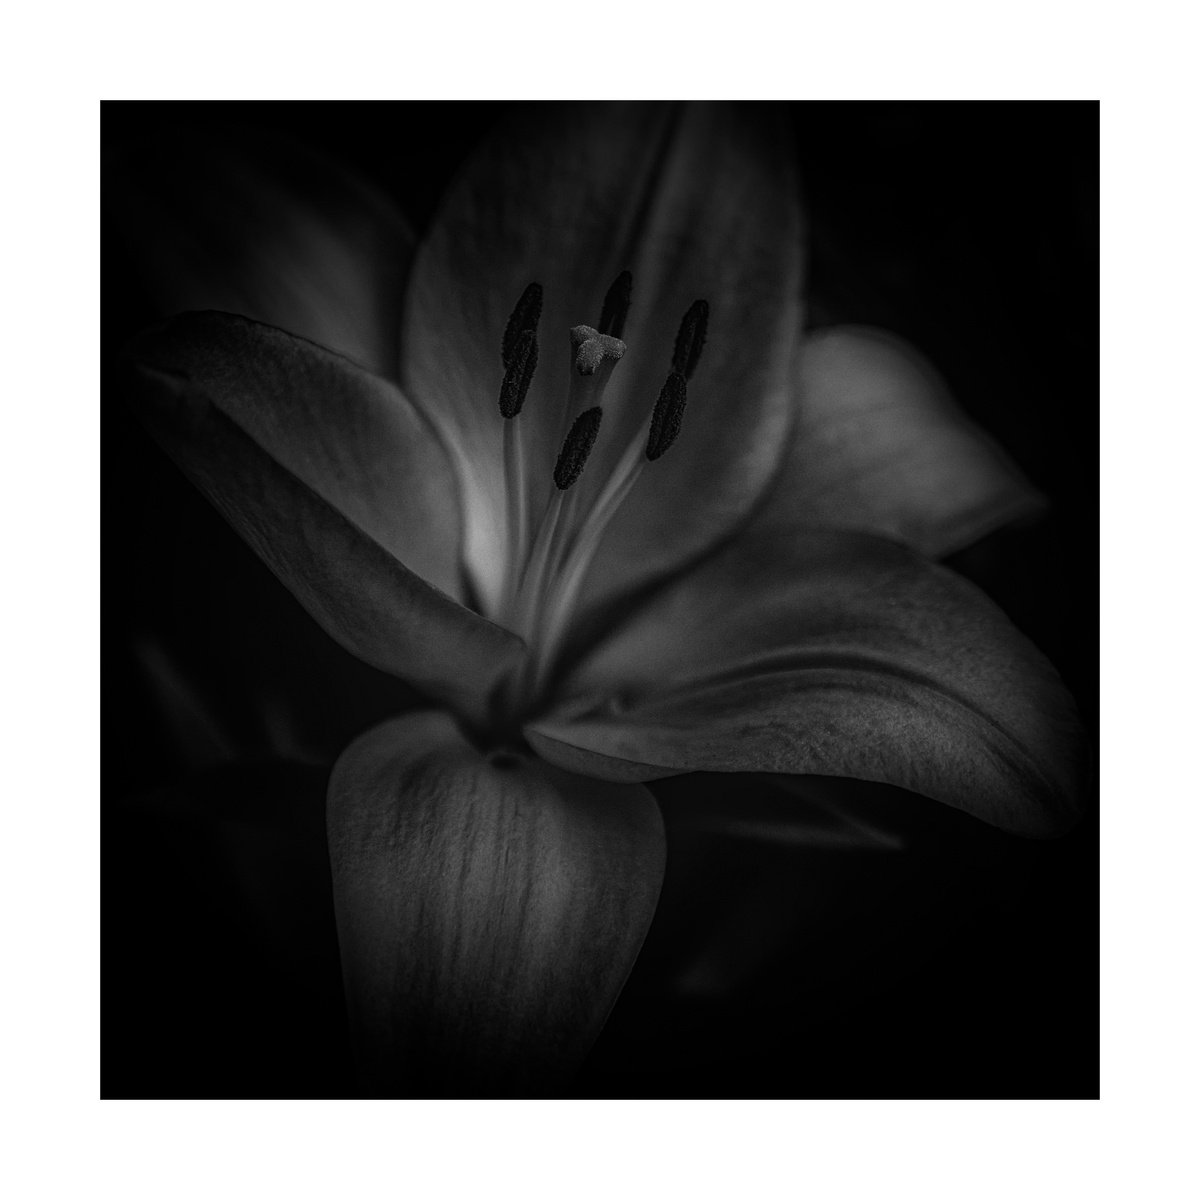 Lily Blooms Number 5 - 12x12 inch Fine Art Photography Limited Edition #1/25 by Graham Briggs